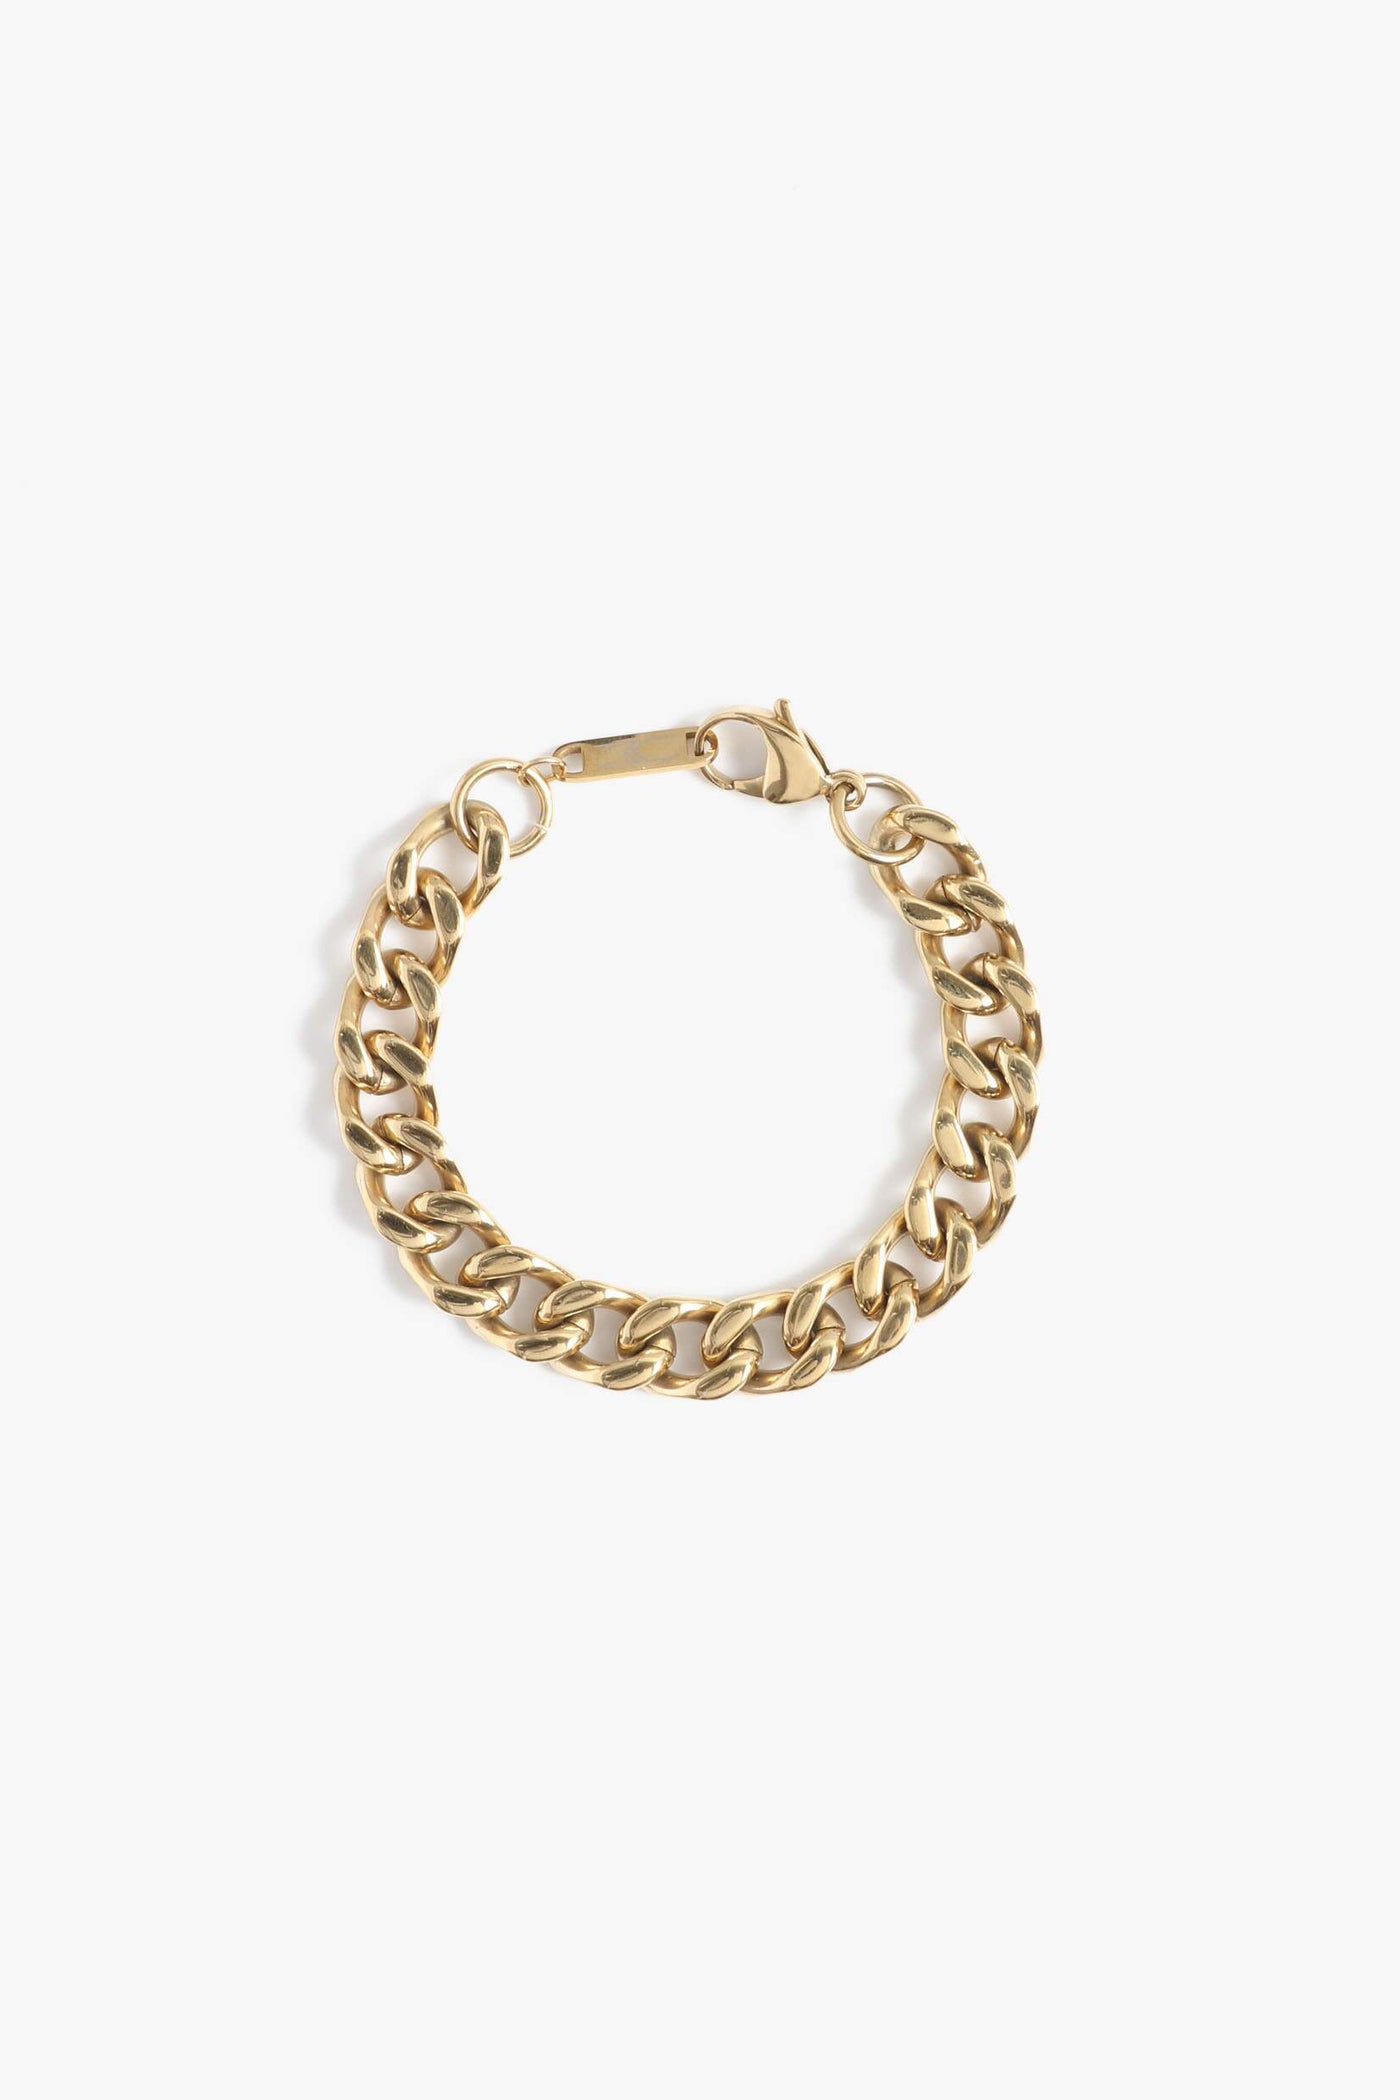 Marrin Costello Jewelry Queens Cuban Link chain bracelet with lobster clasp closure. Waterproof, sustainable, hypoallergenic. 14k gold plated stainless steel.